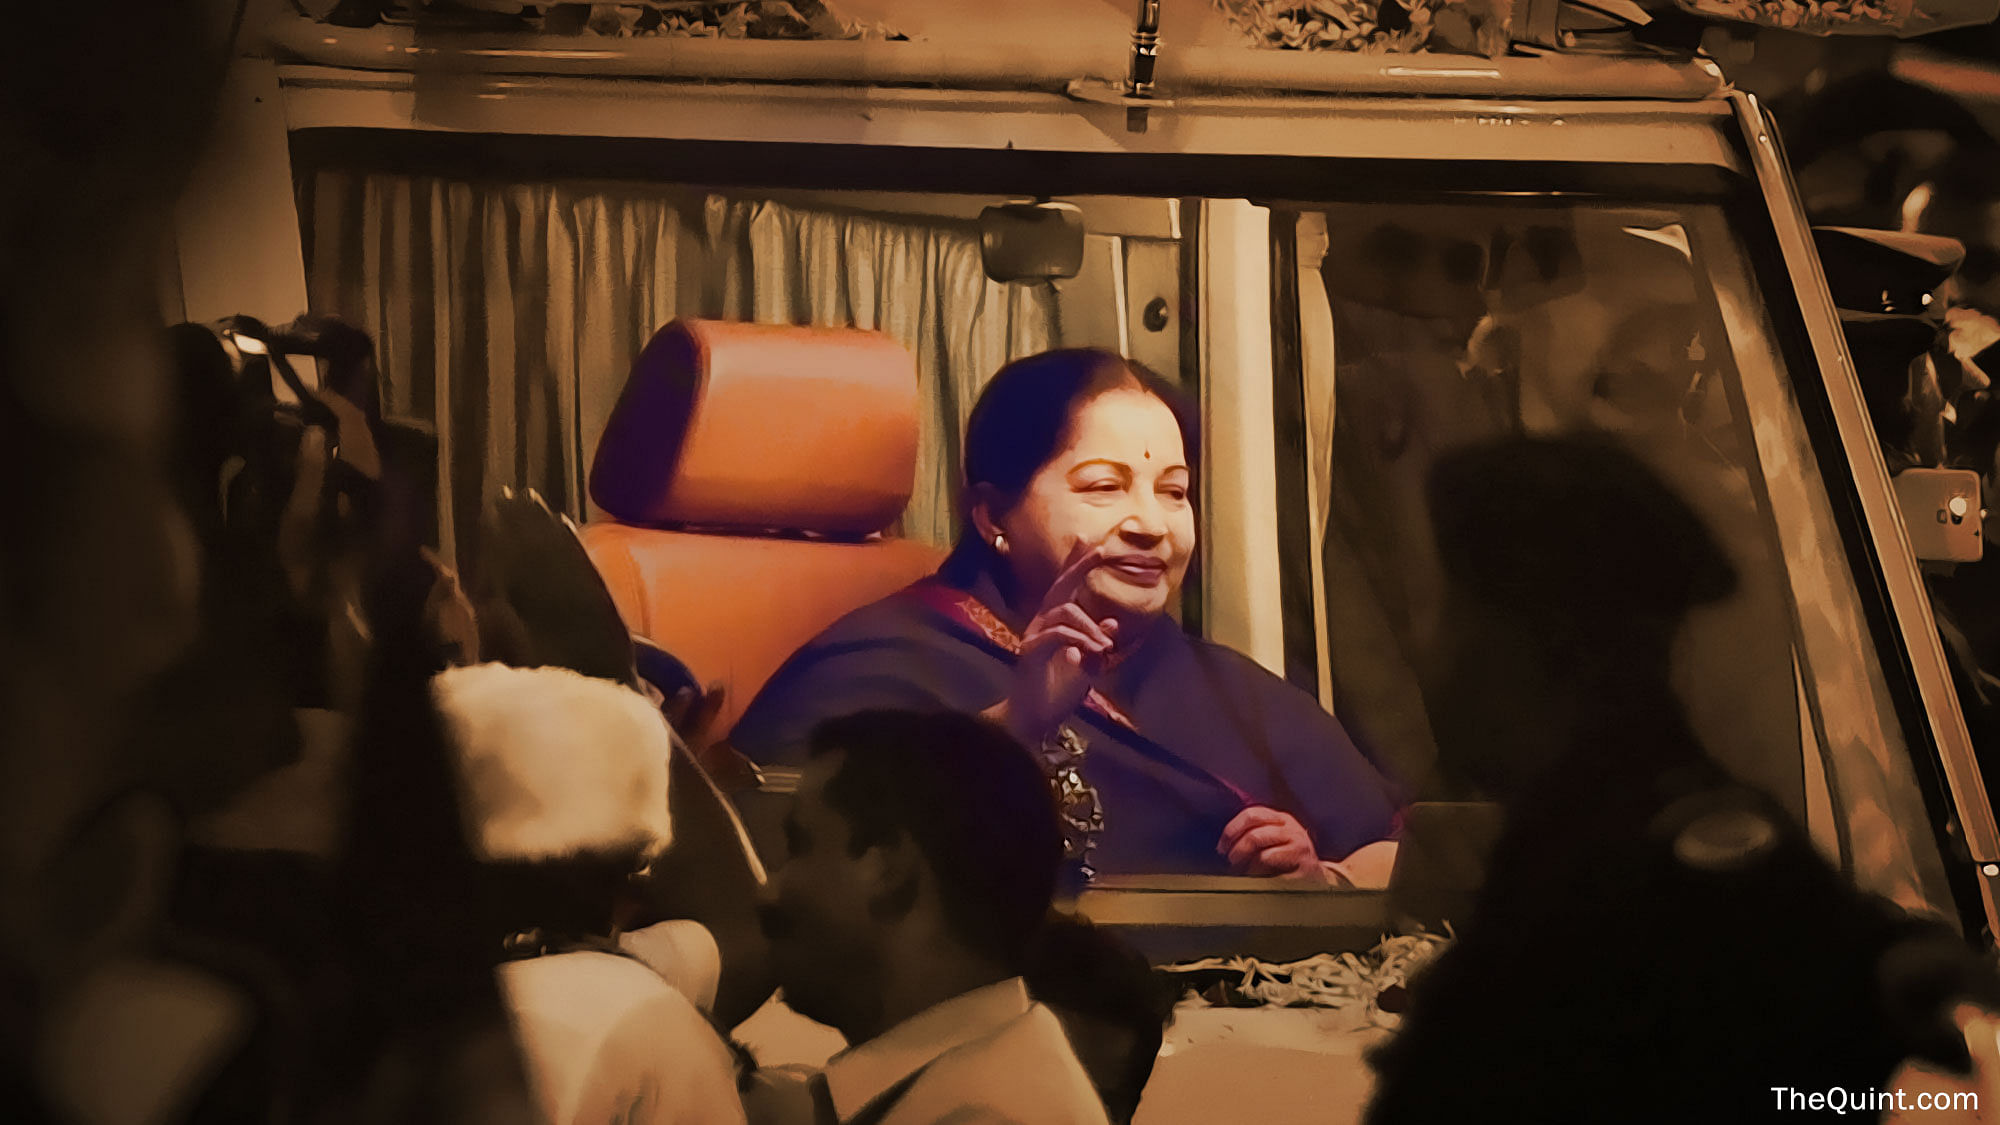 A list of 10 moments that made the BSP supremo what she is. (Photo: Liju Joseph/<b>The Quint</b>)